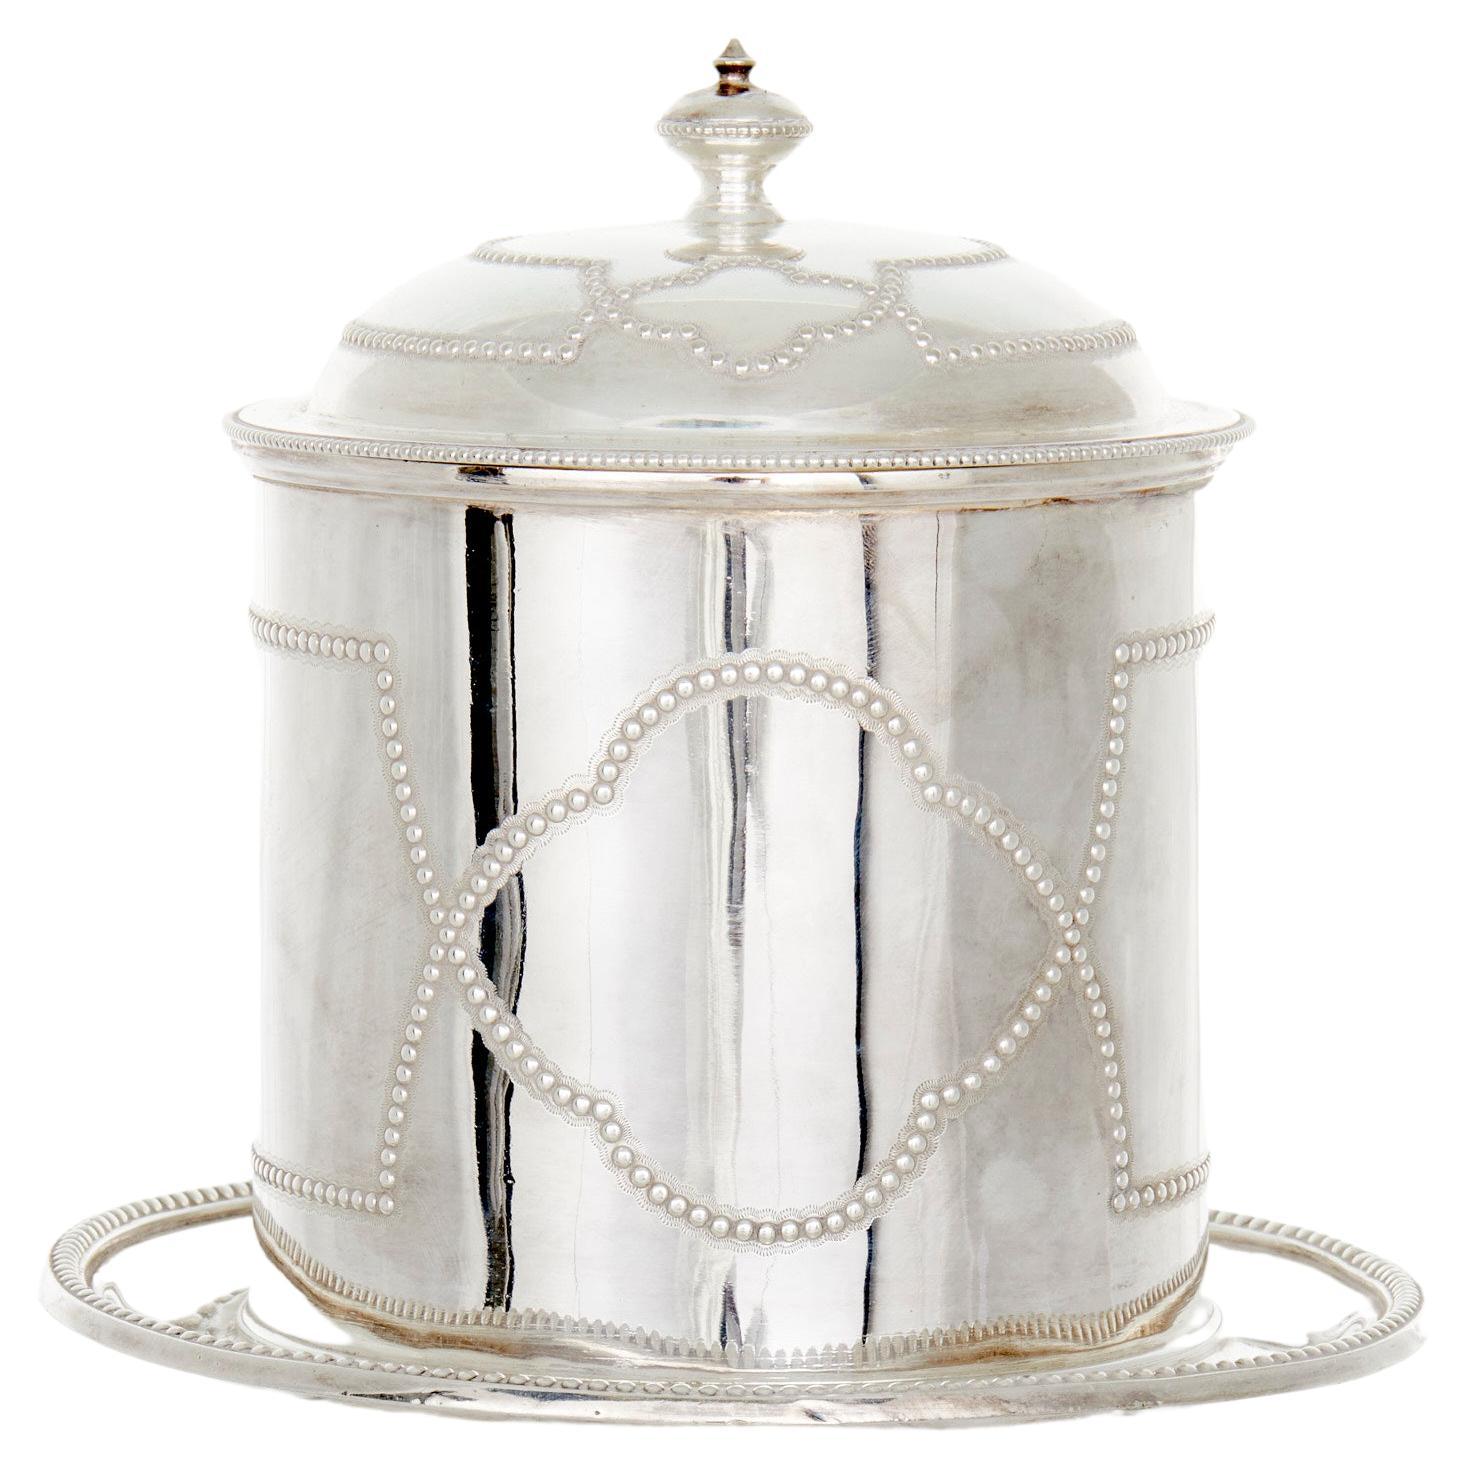 English Silver Plate Tea Caddy / Thin Biscuit